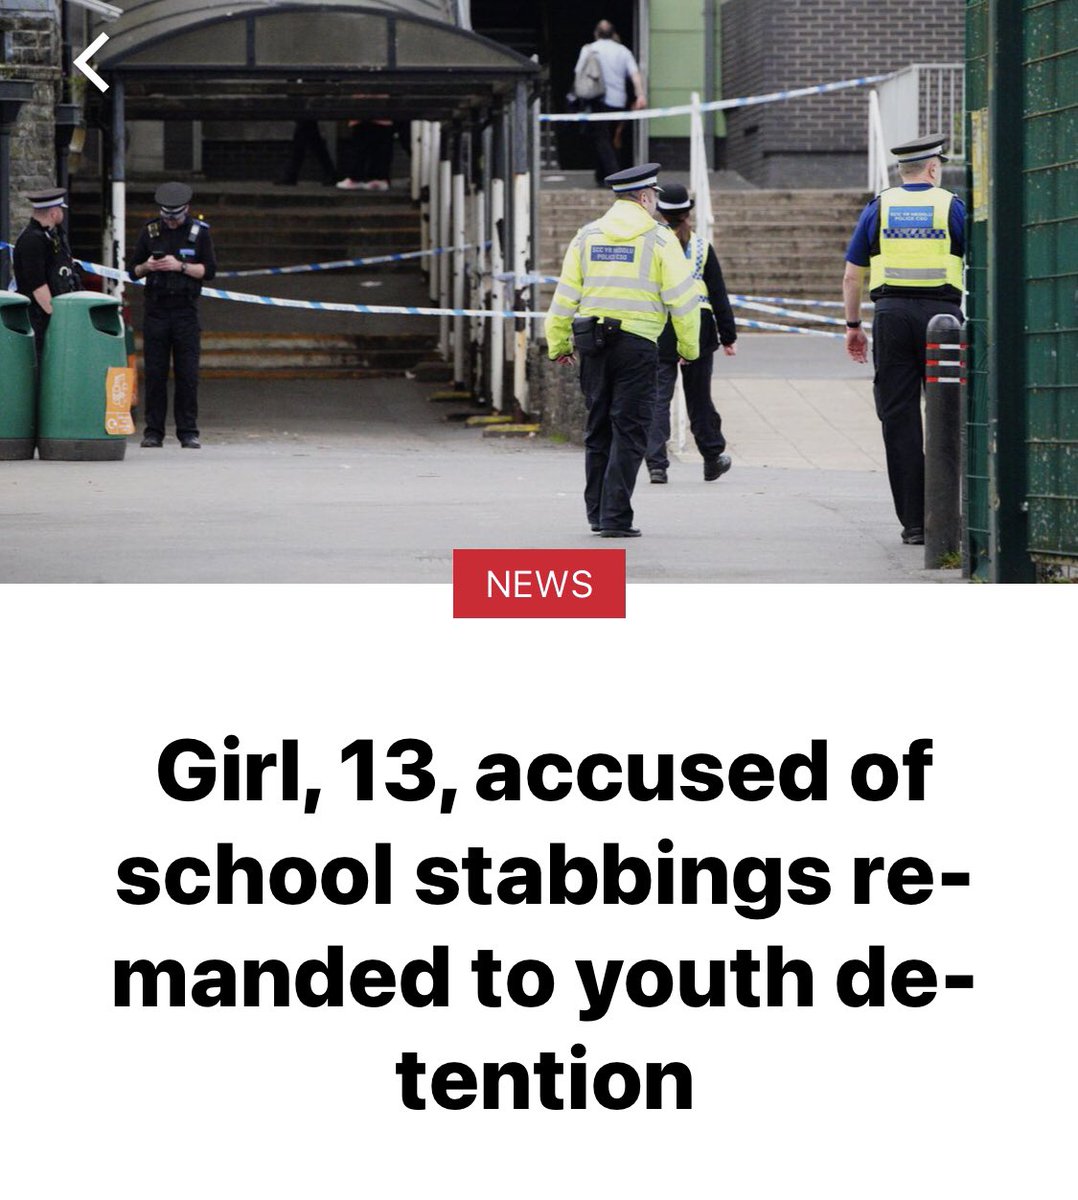 13 YEAR OLD GIRL CHARGED WITH SCHOOL STABBINGS IS REMANDED

The 13-year-old, who cannot be named for legal reasons, showed no emotion as she appeared in the dock at Llanelli Magistrates' Court on Friday.

The girl is accused of stabbing two teachers and a pupil at a school in…